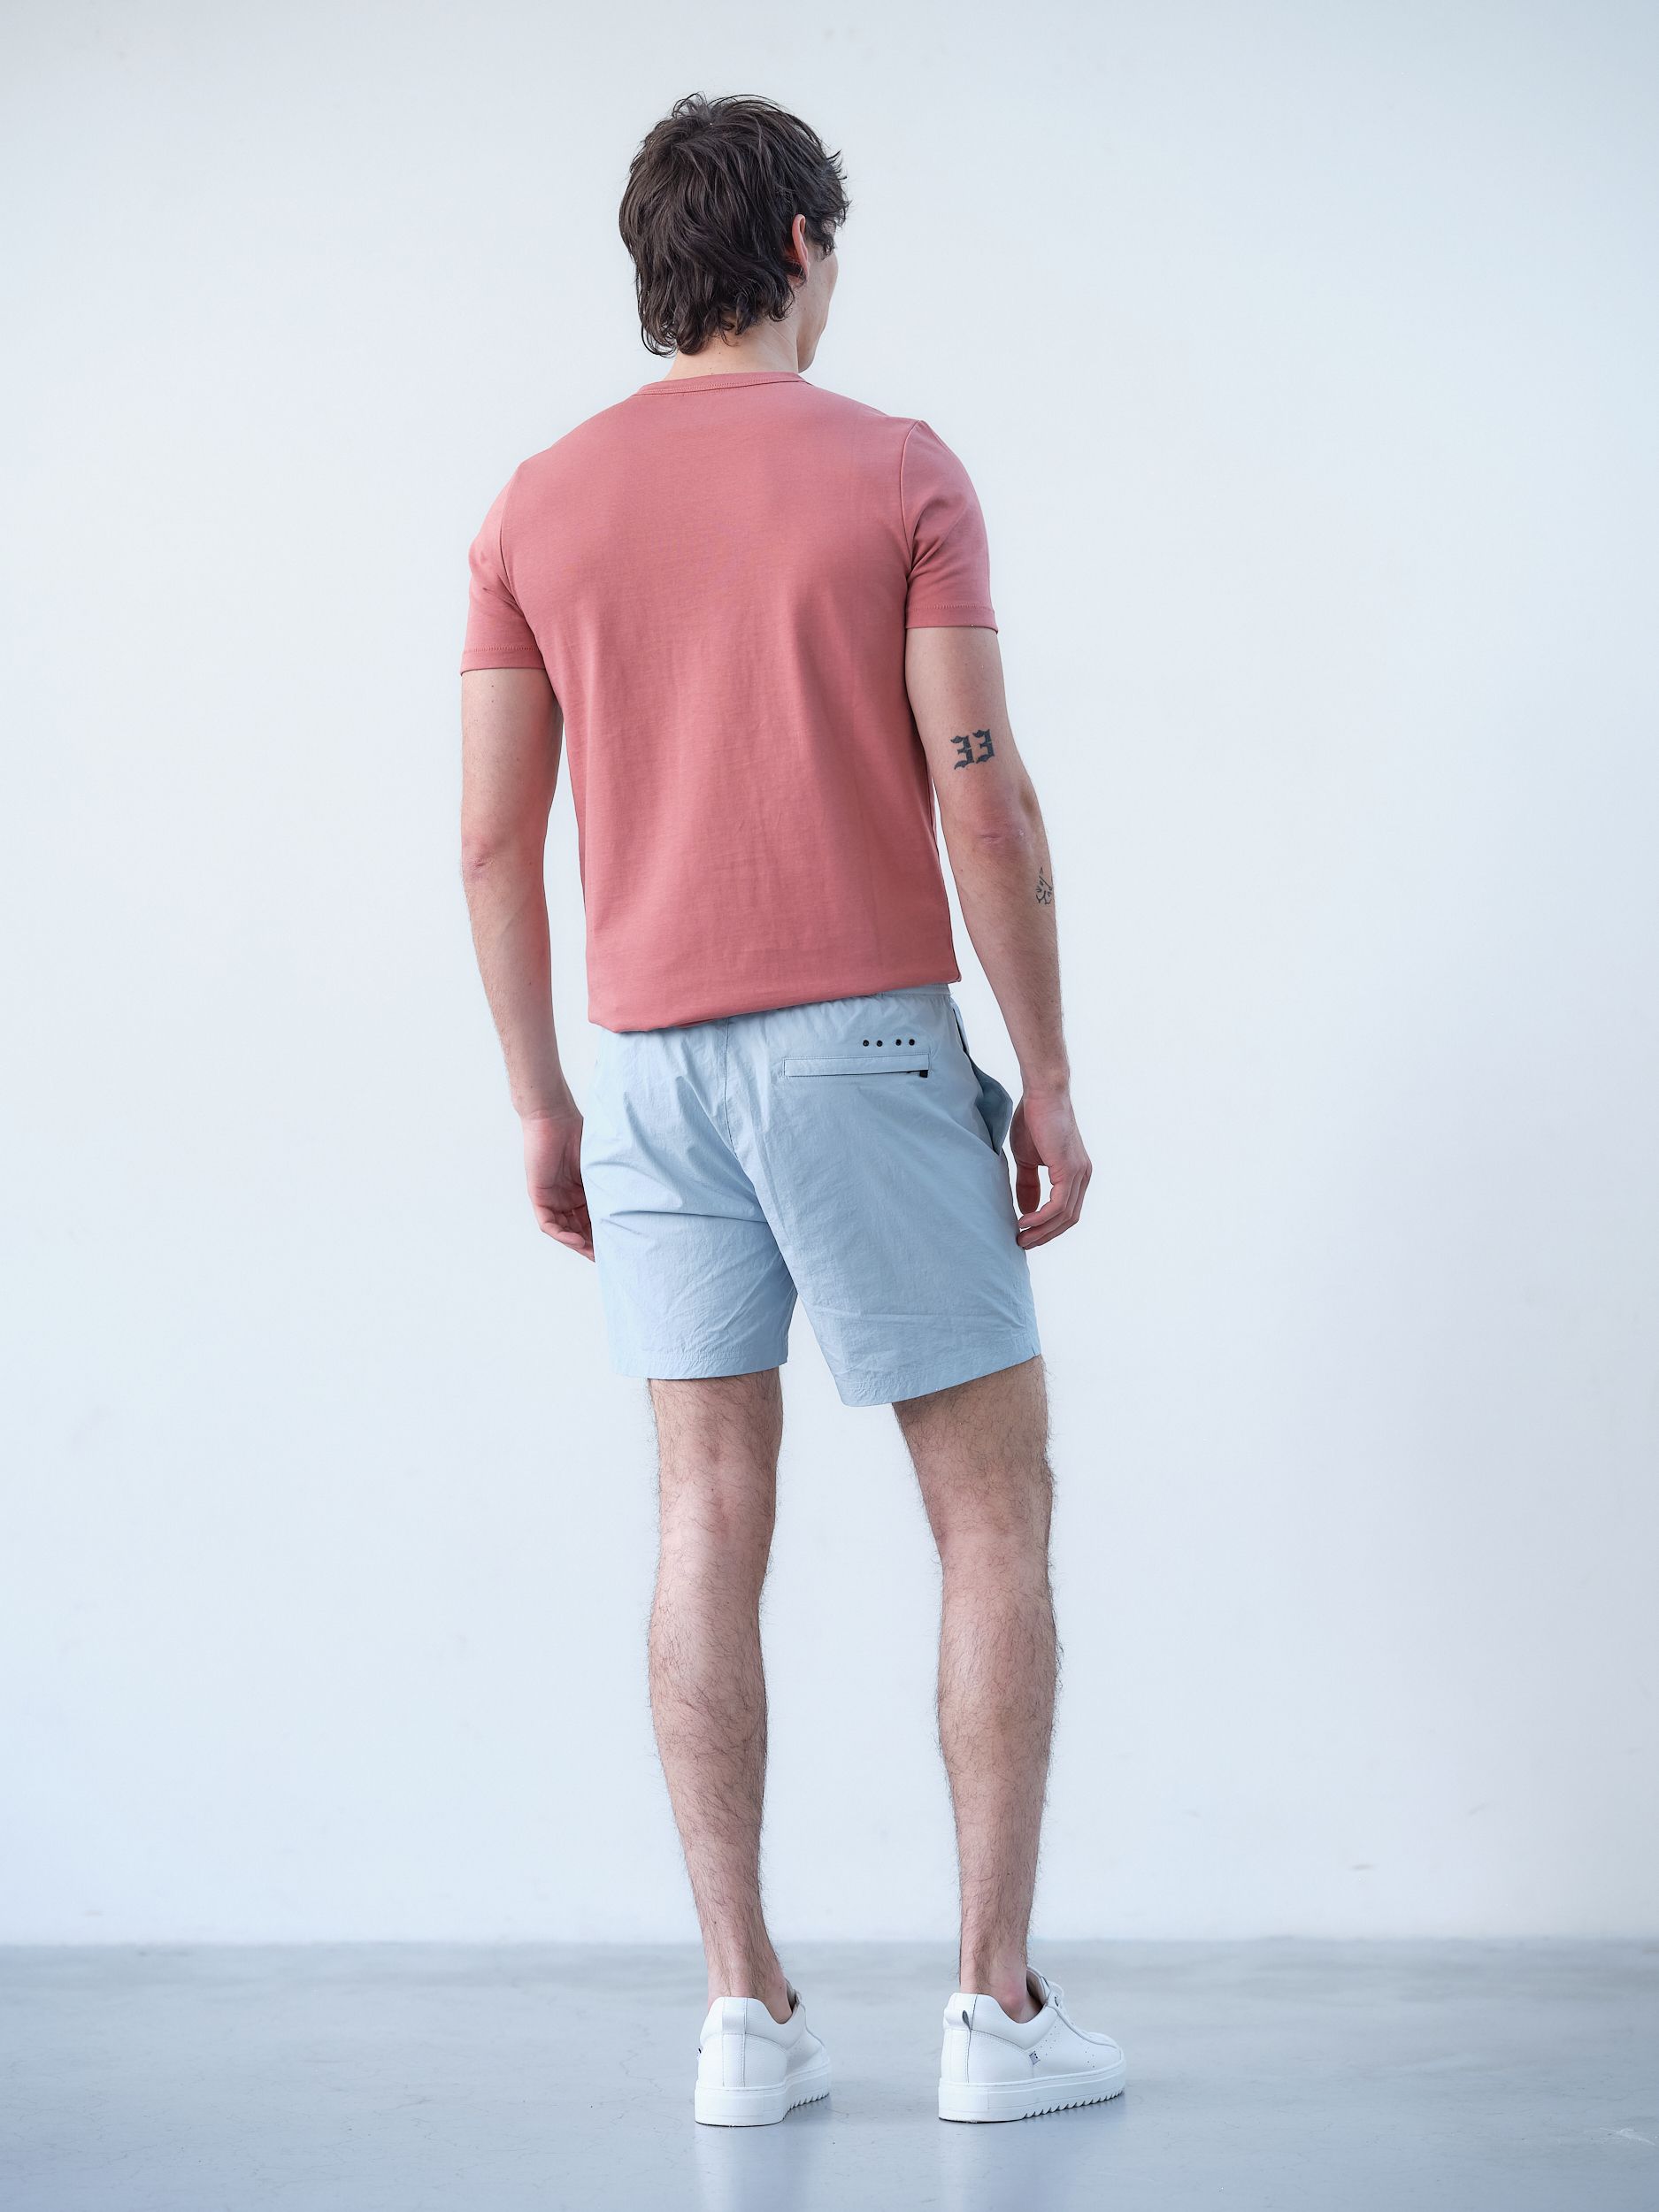 J.C. RAGS Zwemshort Forget-me-not 081579-005-L